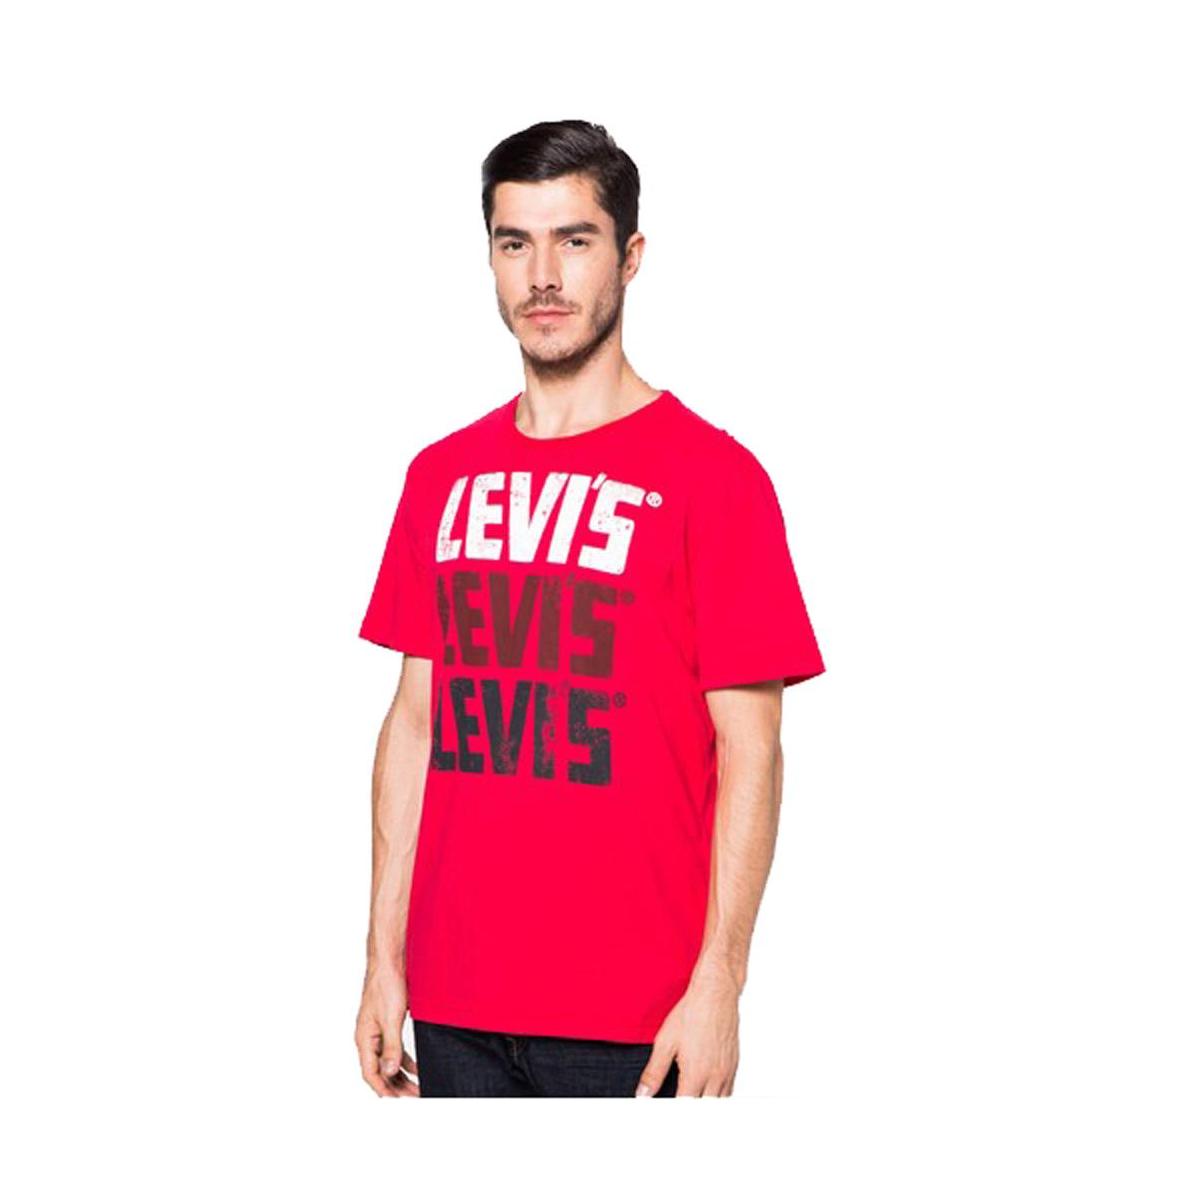 Levis T-shirt Red